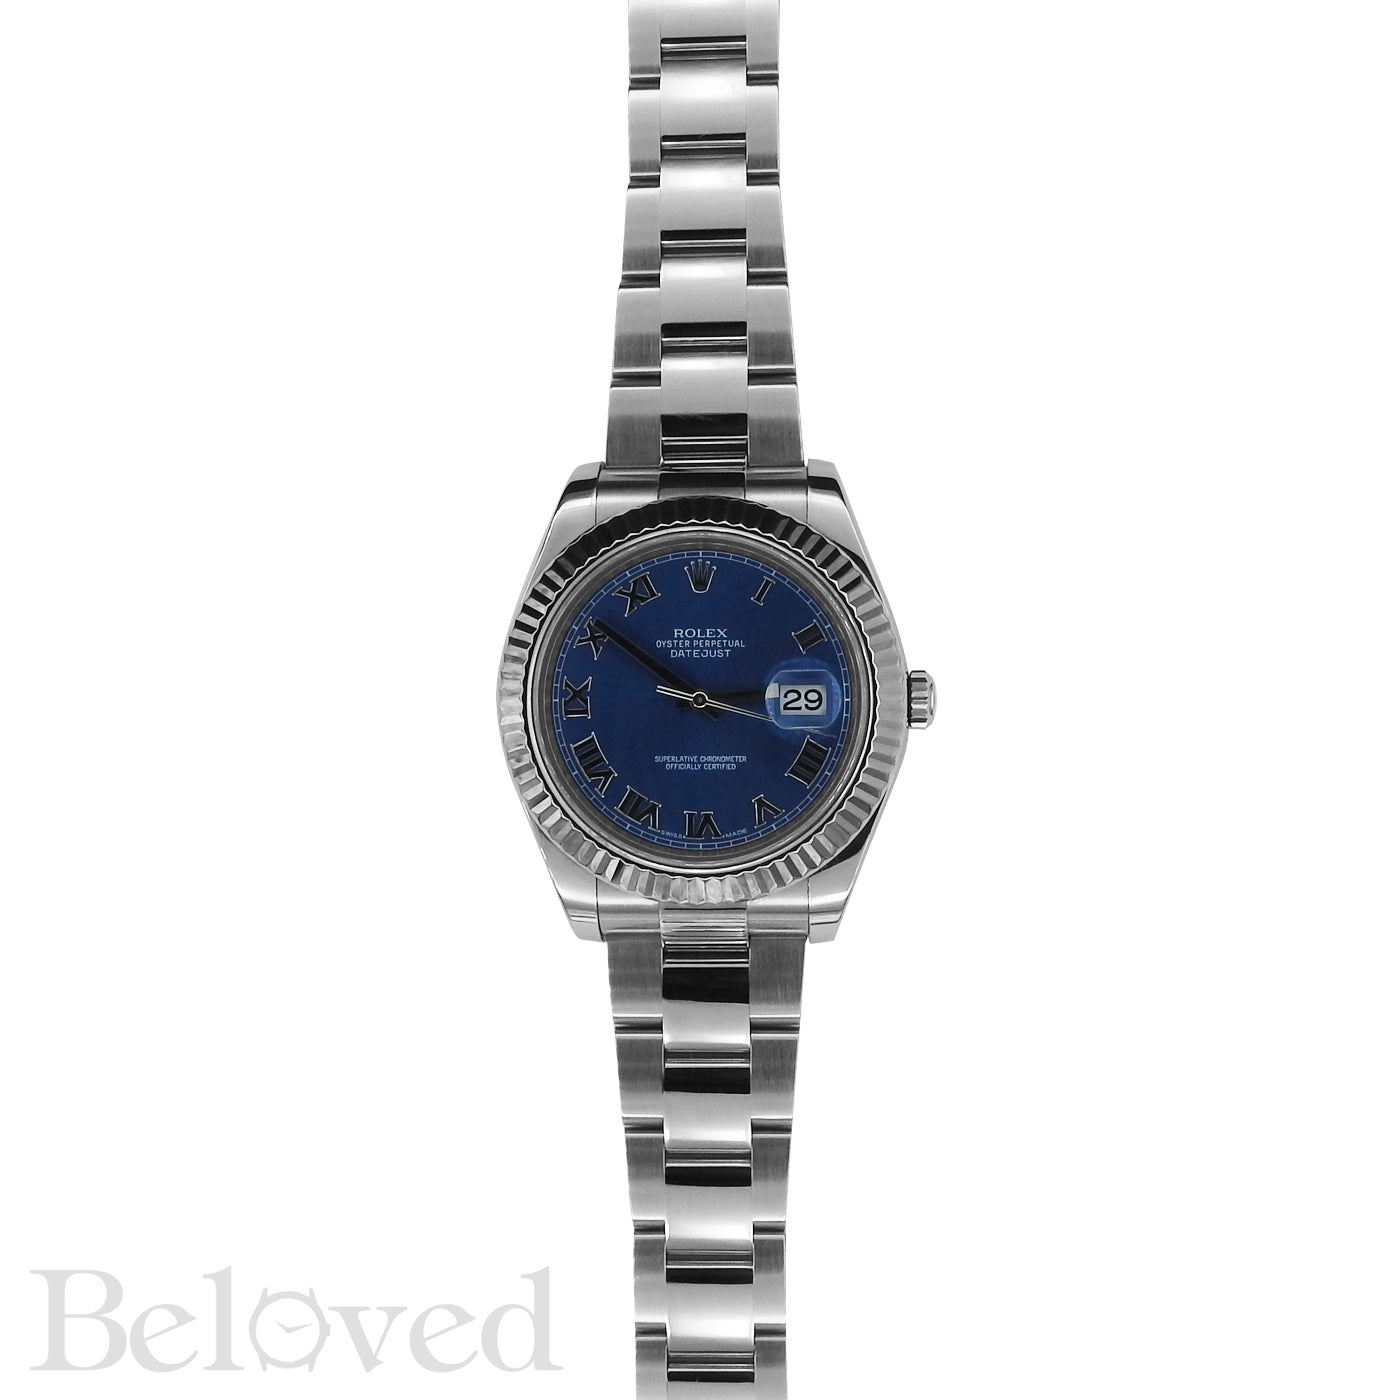 Rolex Datejust II 116334 Blue Roman Dial with Five Year Warranty Card and Rolex Box Image 3